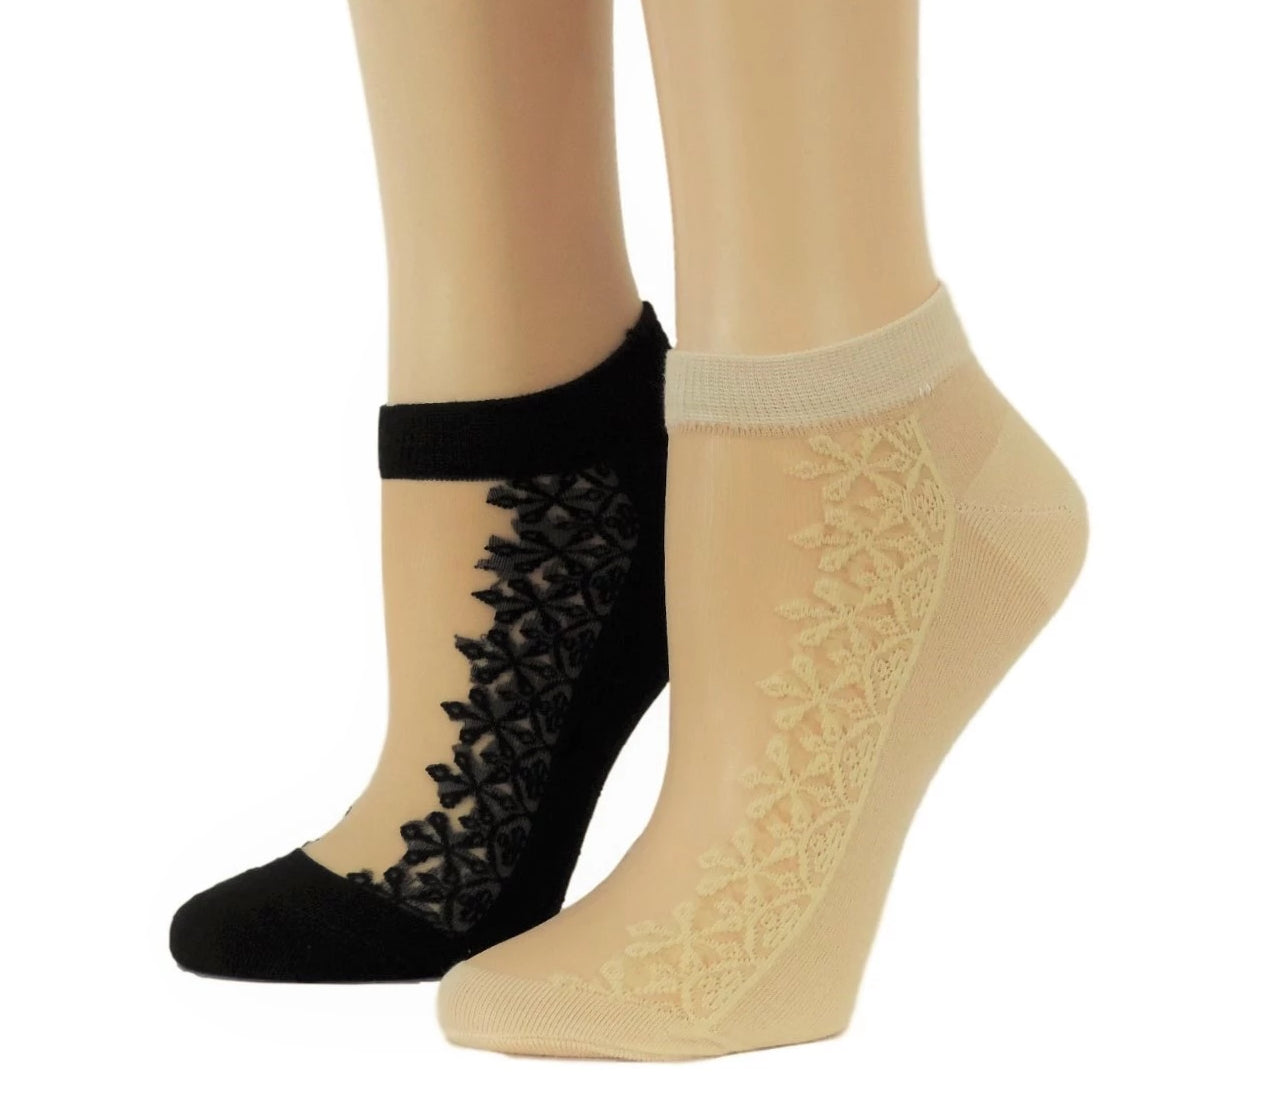 Sequence Floral Ankle Sheer Socks (Pack of 2 pairs) - Global Trendz Fashion®